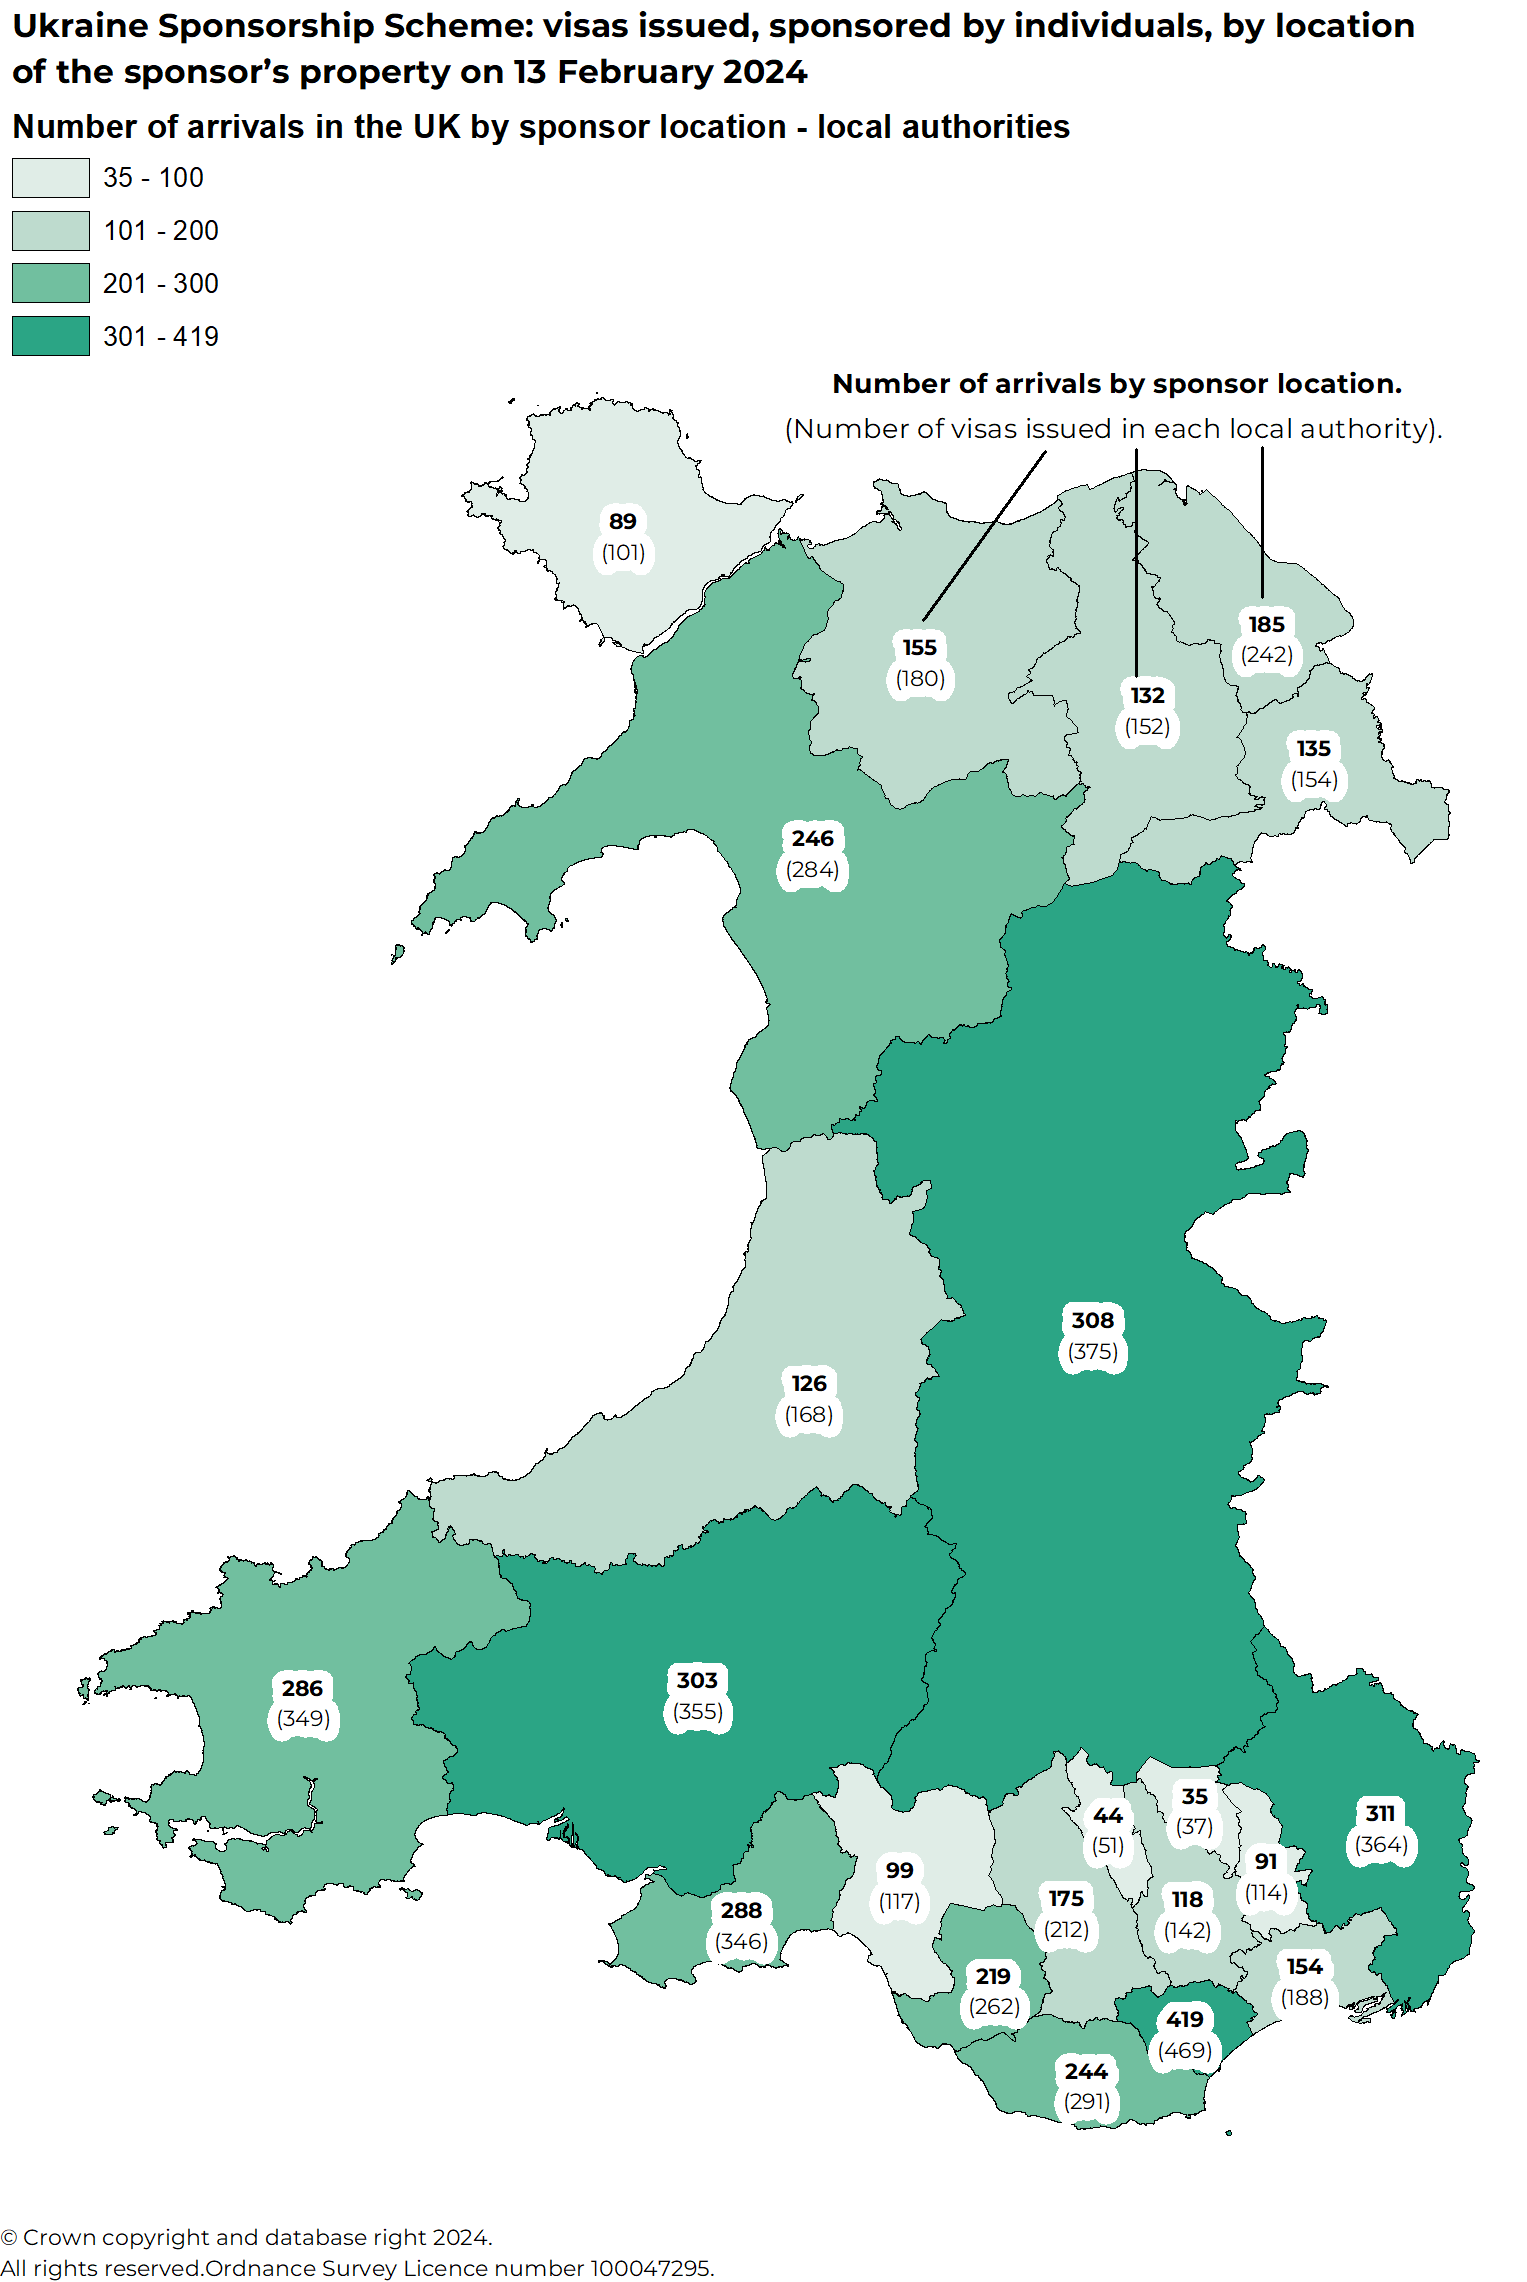 Image shows a map of Wales and the numbers of visas issued and sponsored by individuals in each local authority. Cardiff had the most (419), while Blaenau Gwent had the fewest (35).